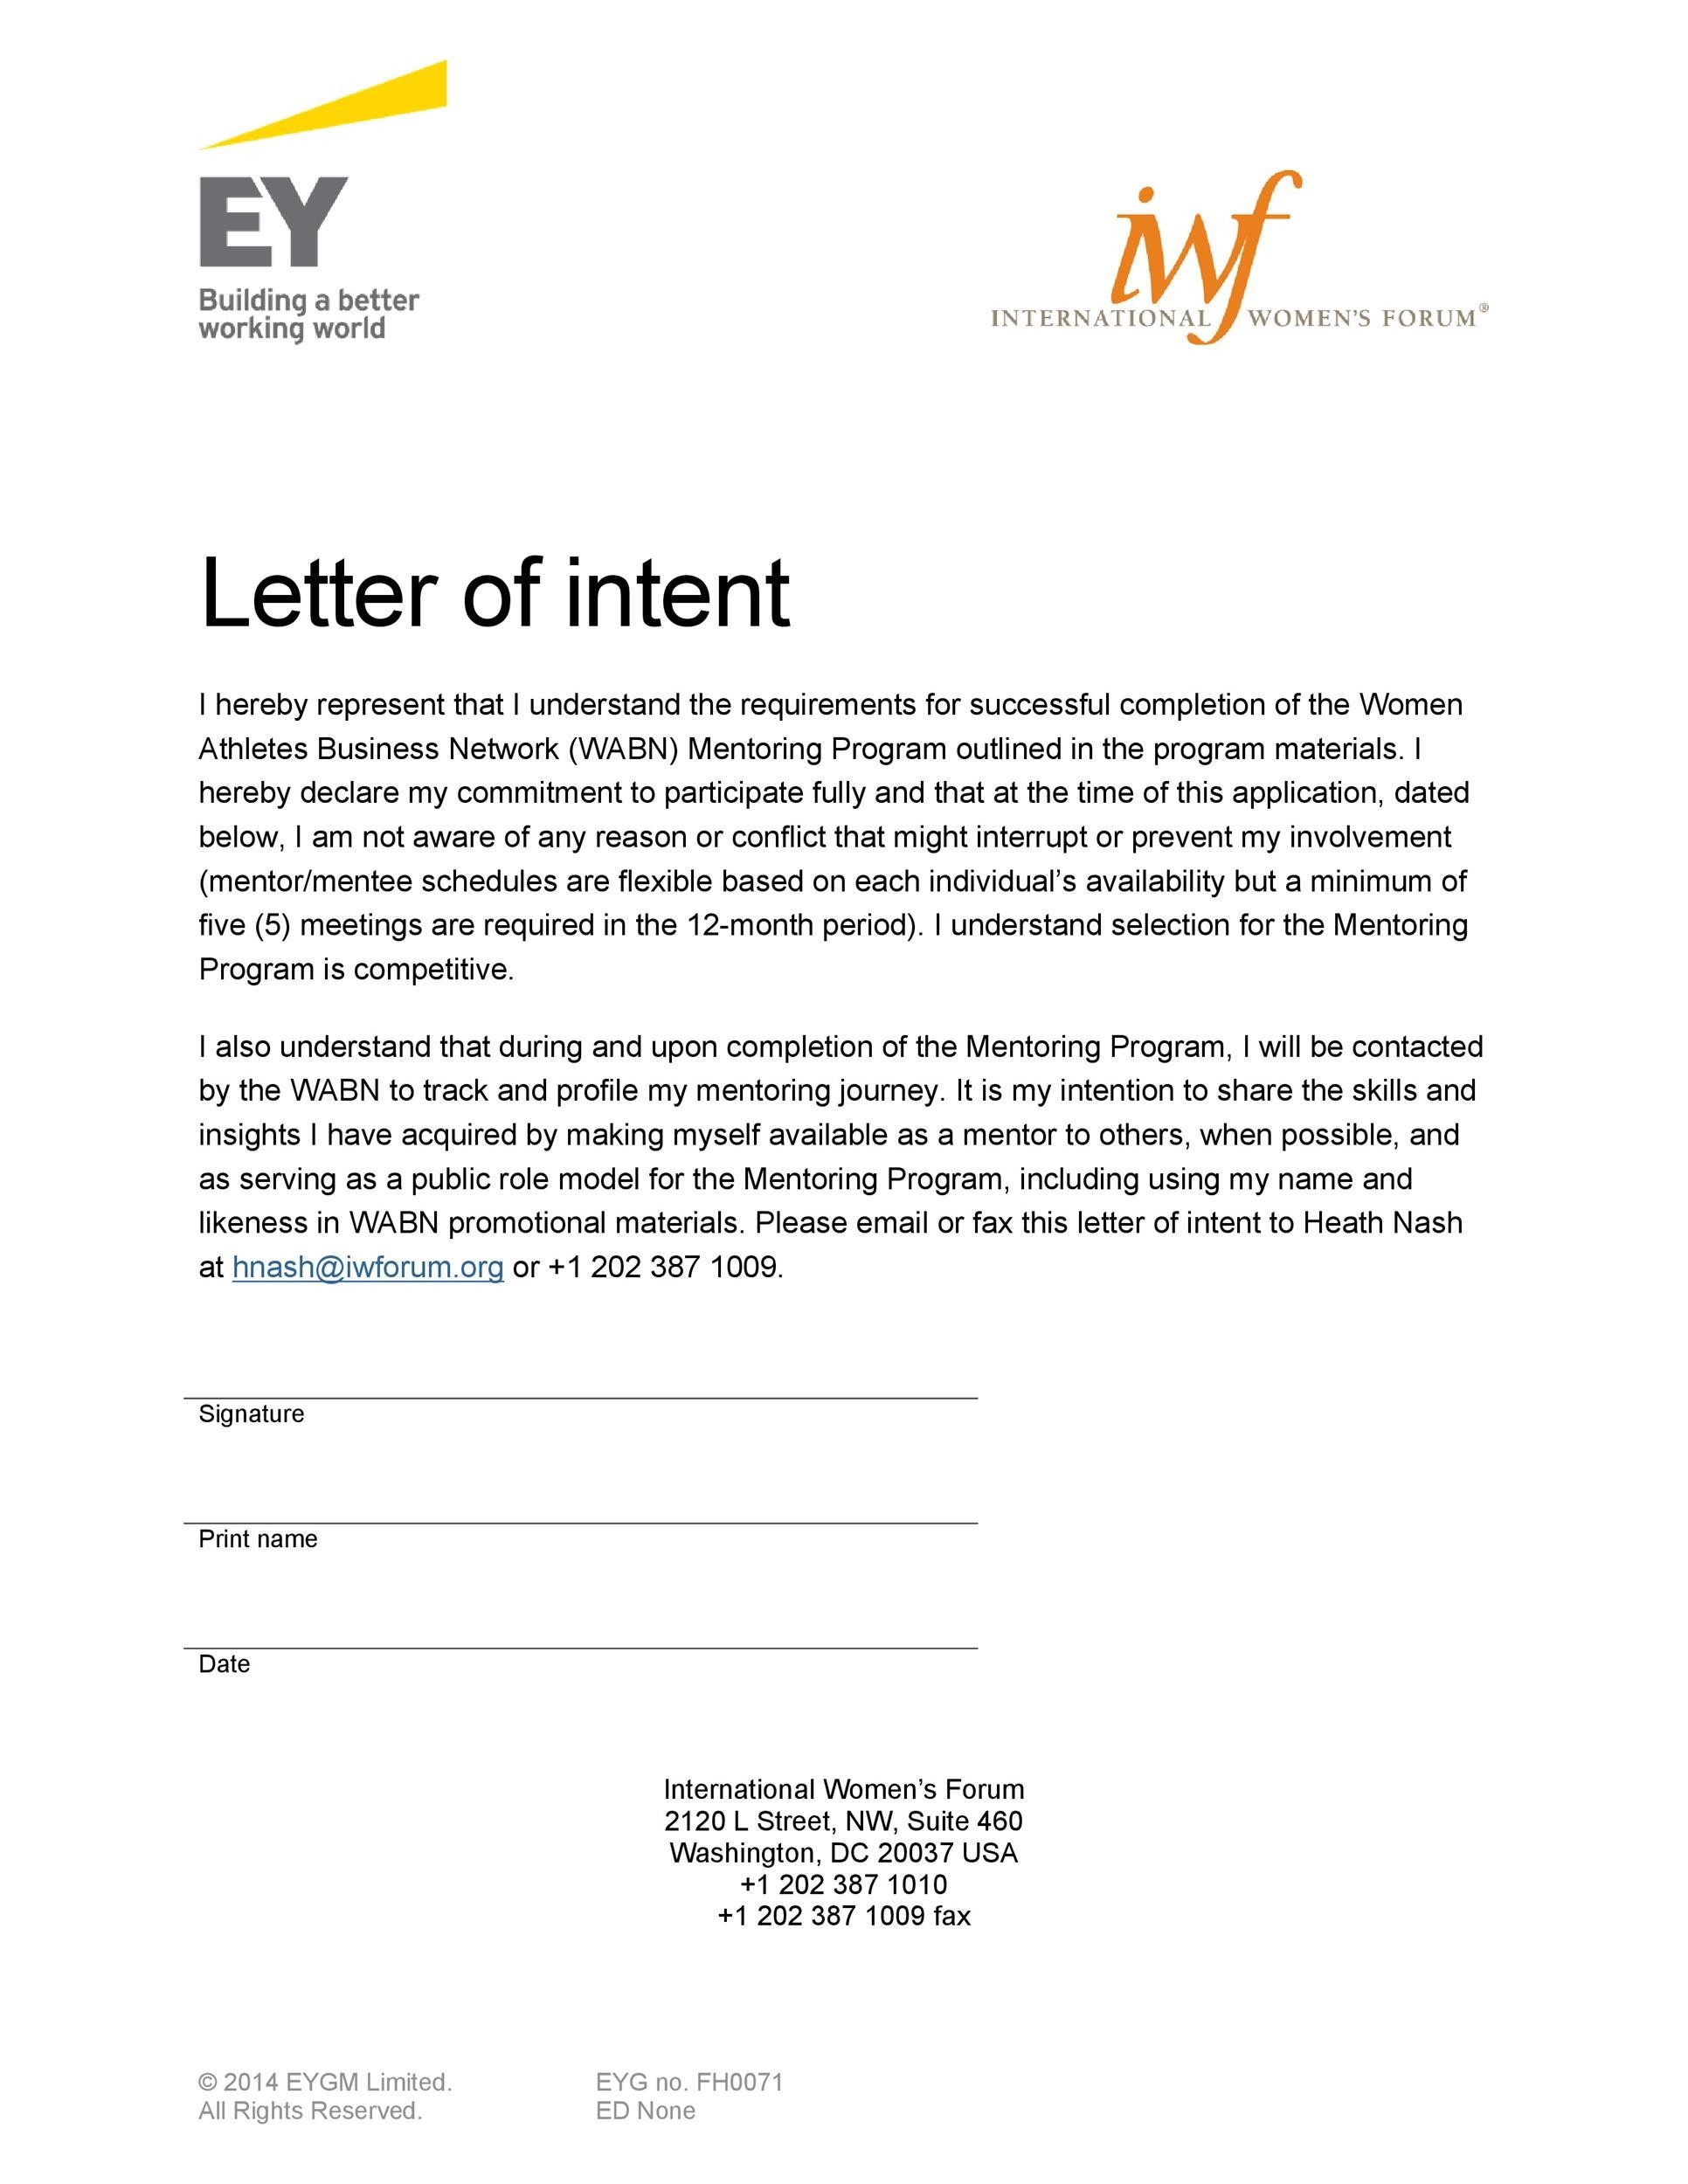 How to write a letter of intent for partnership